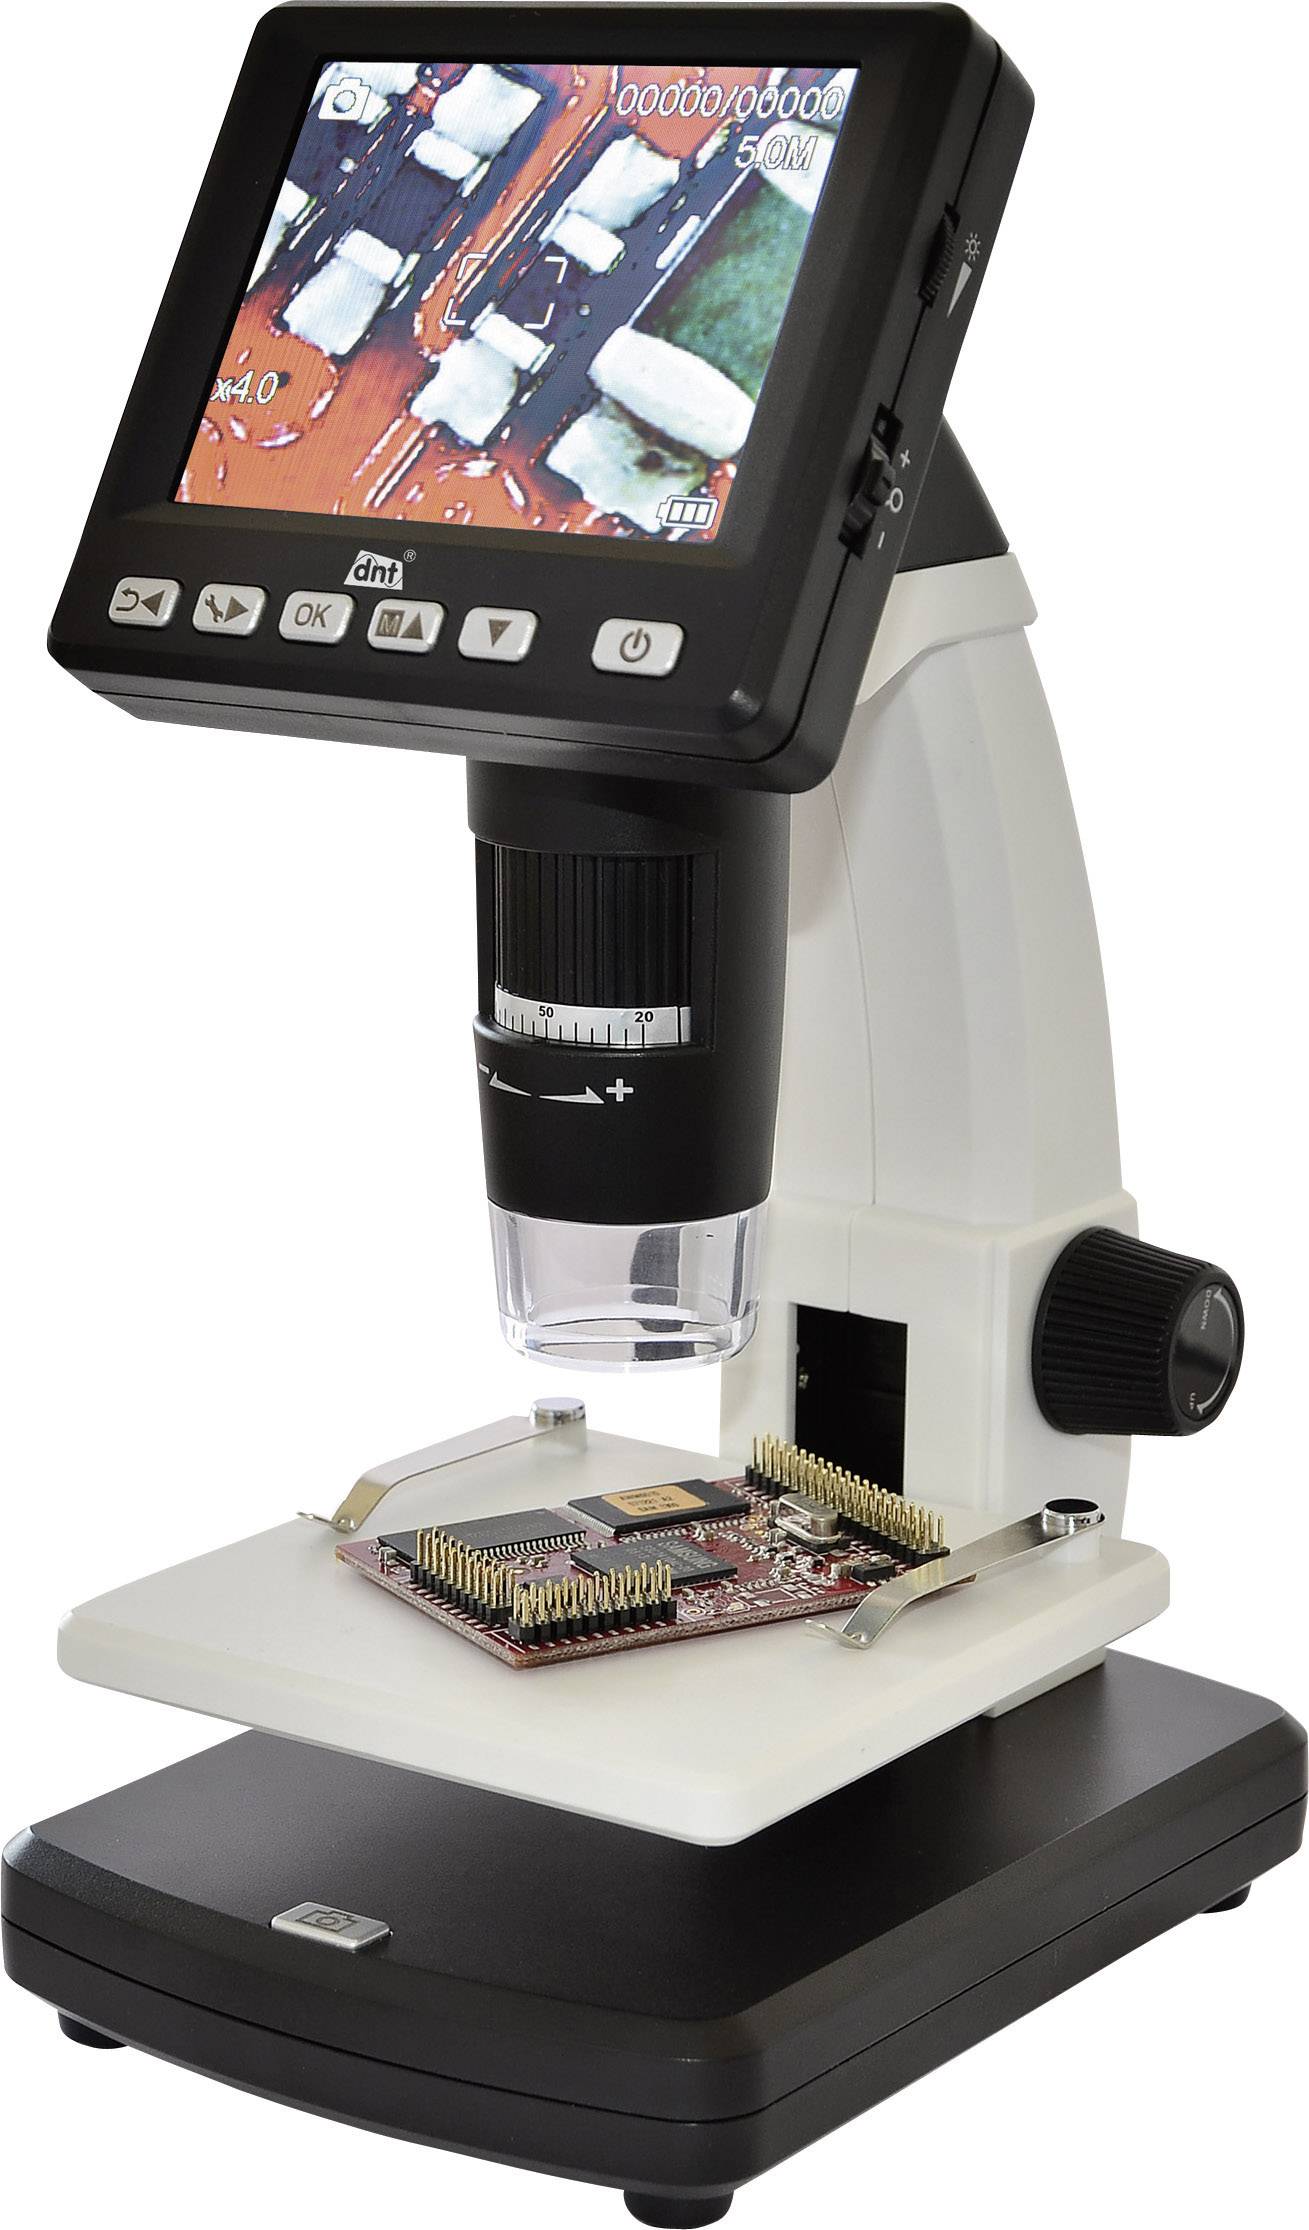 Cooling tech microscope software download